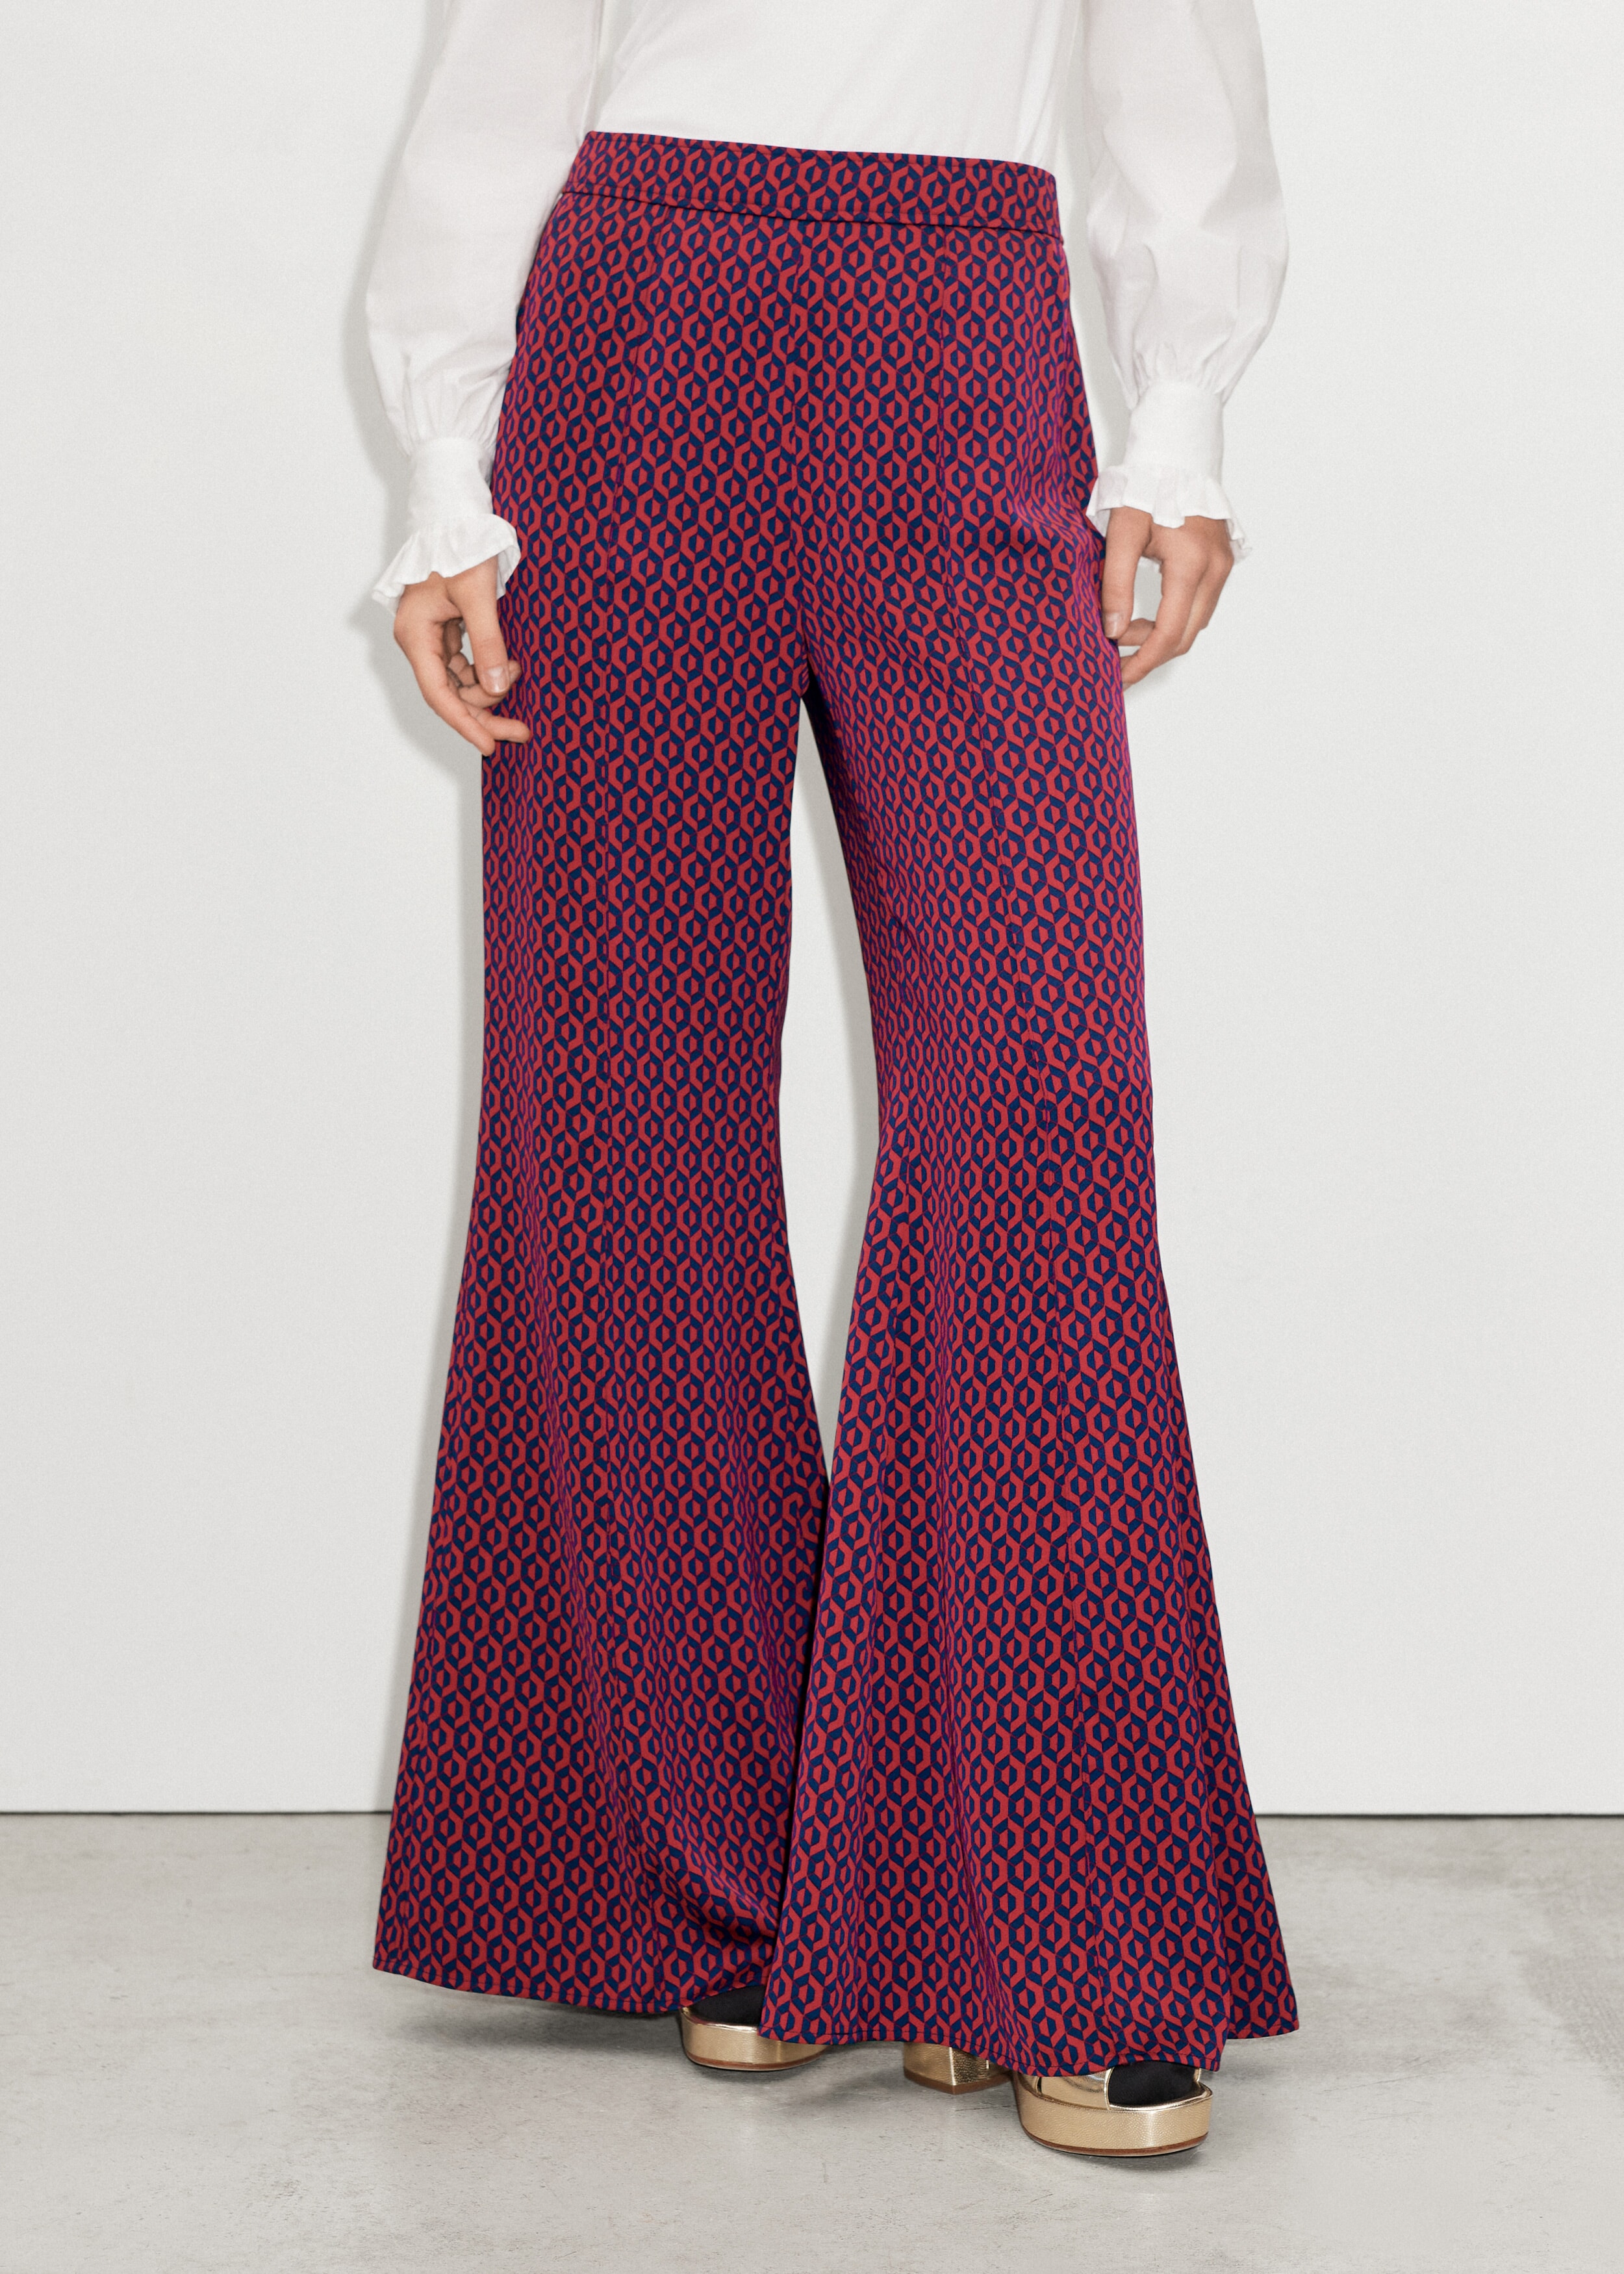 Geo Hex Print Exaggerated Flare Pant Purple/Midnight Navy